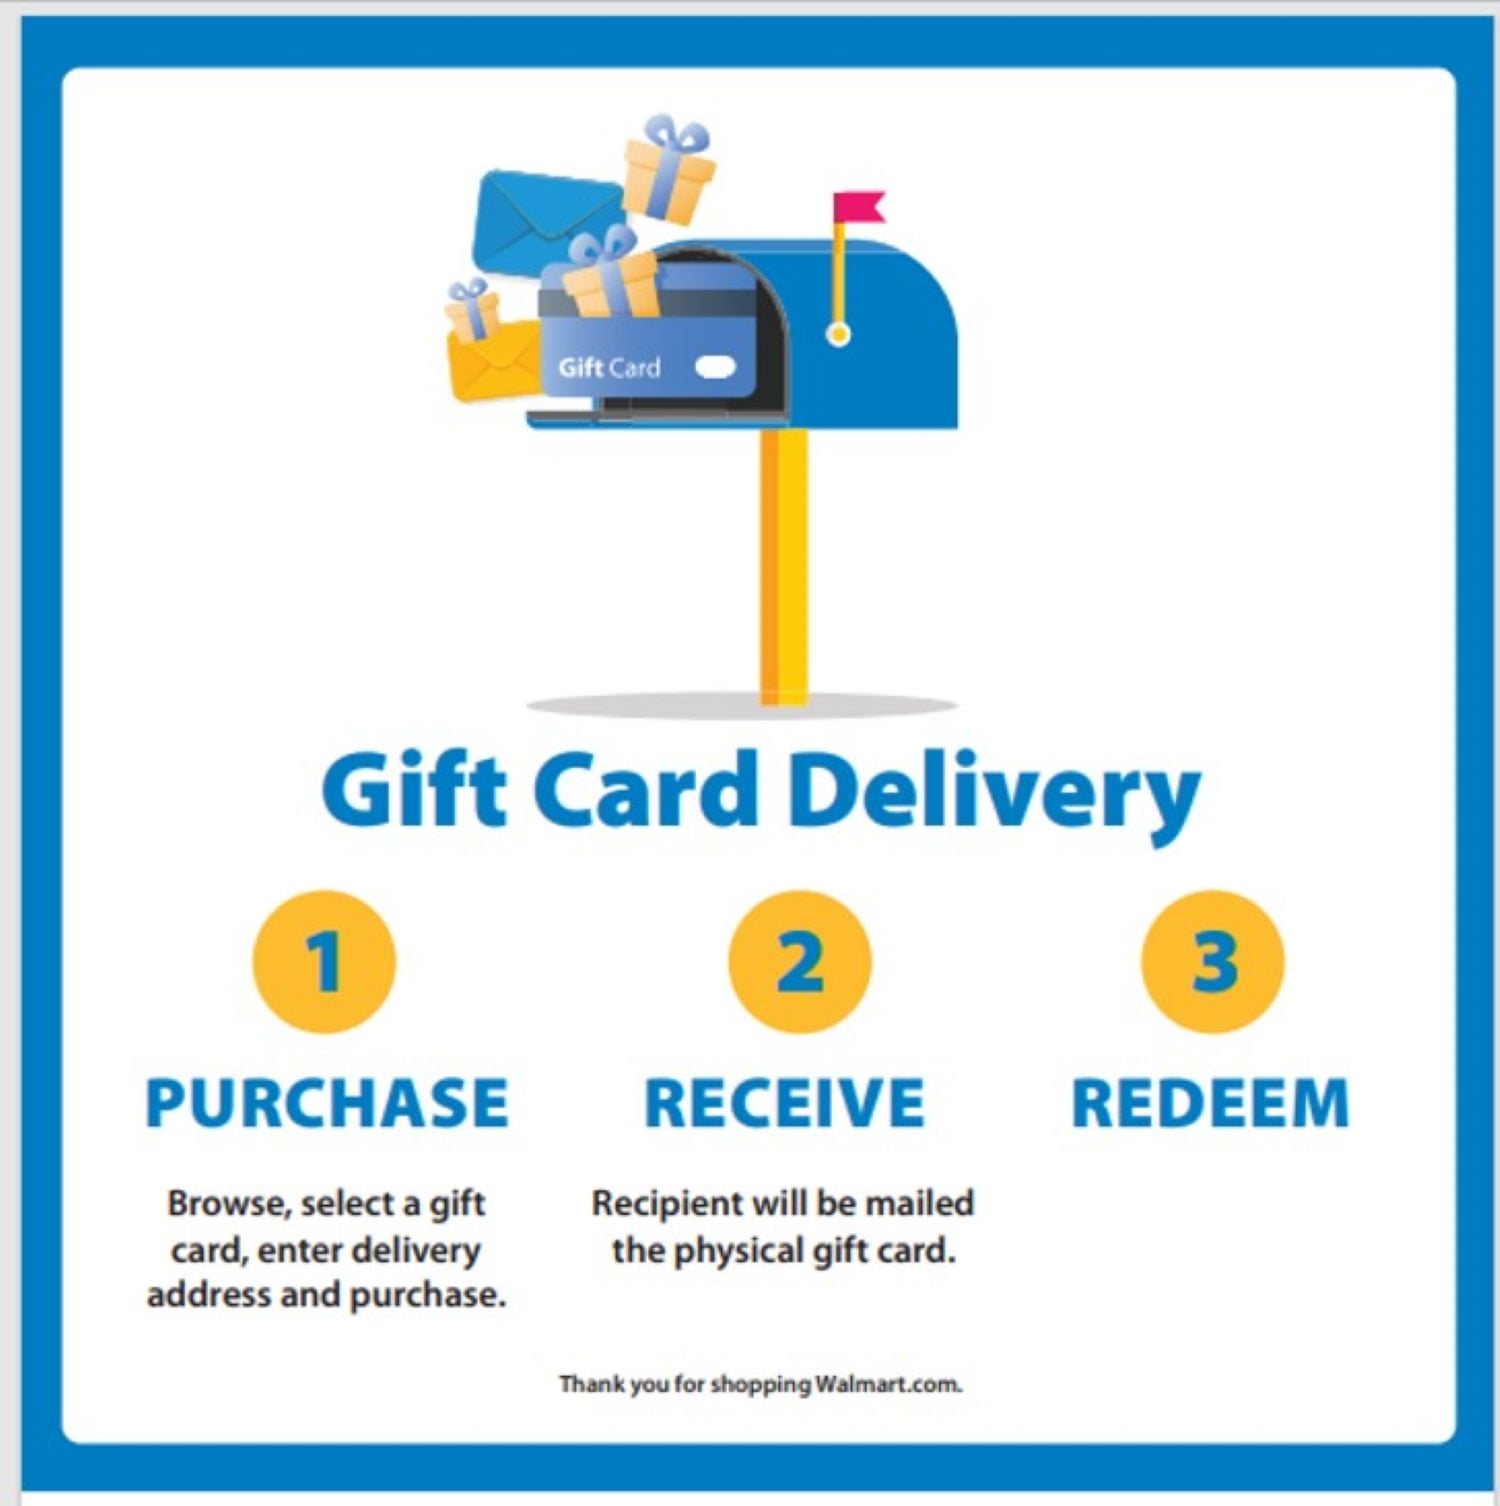 Buy Roblox Gift Card (CA) - Instant Code Delivery - SEAGM